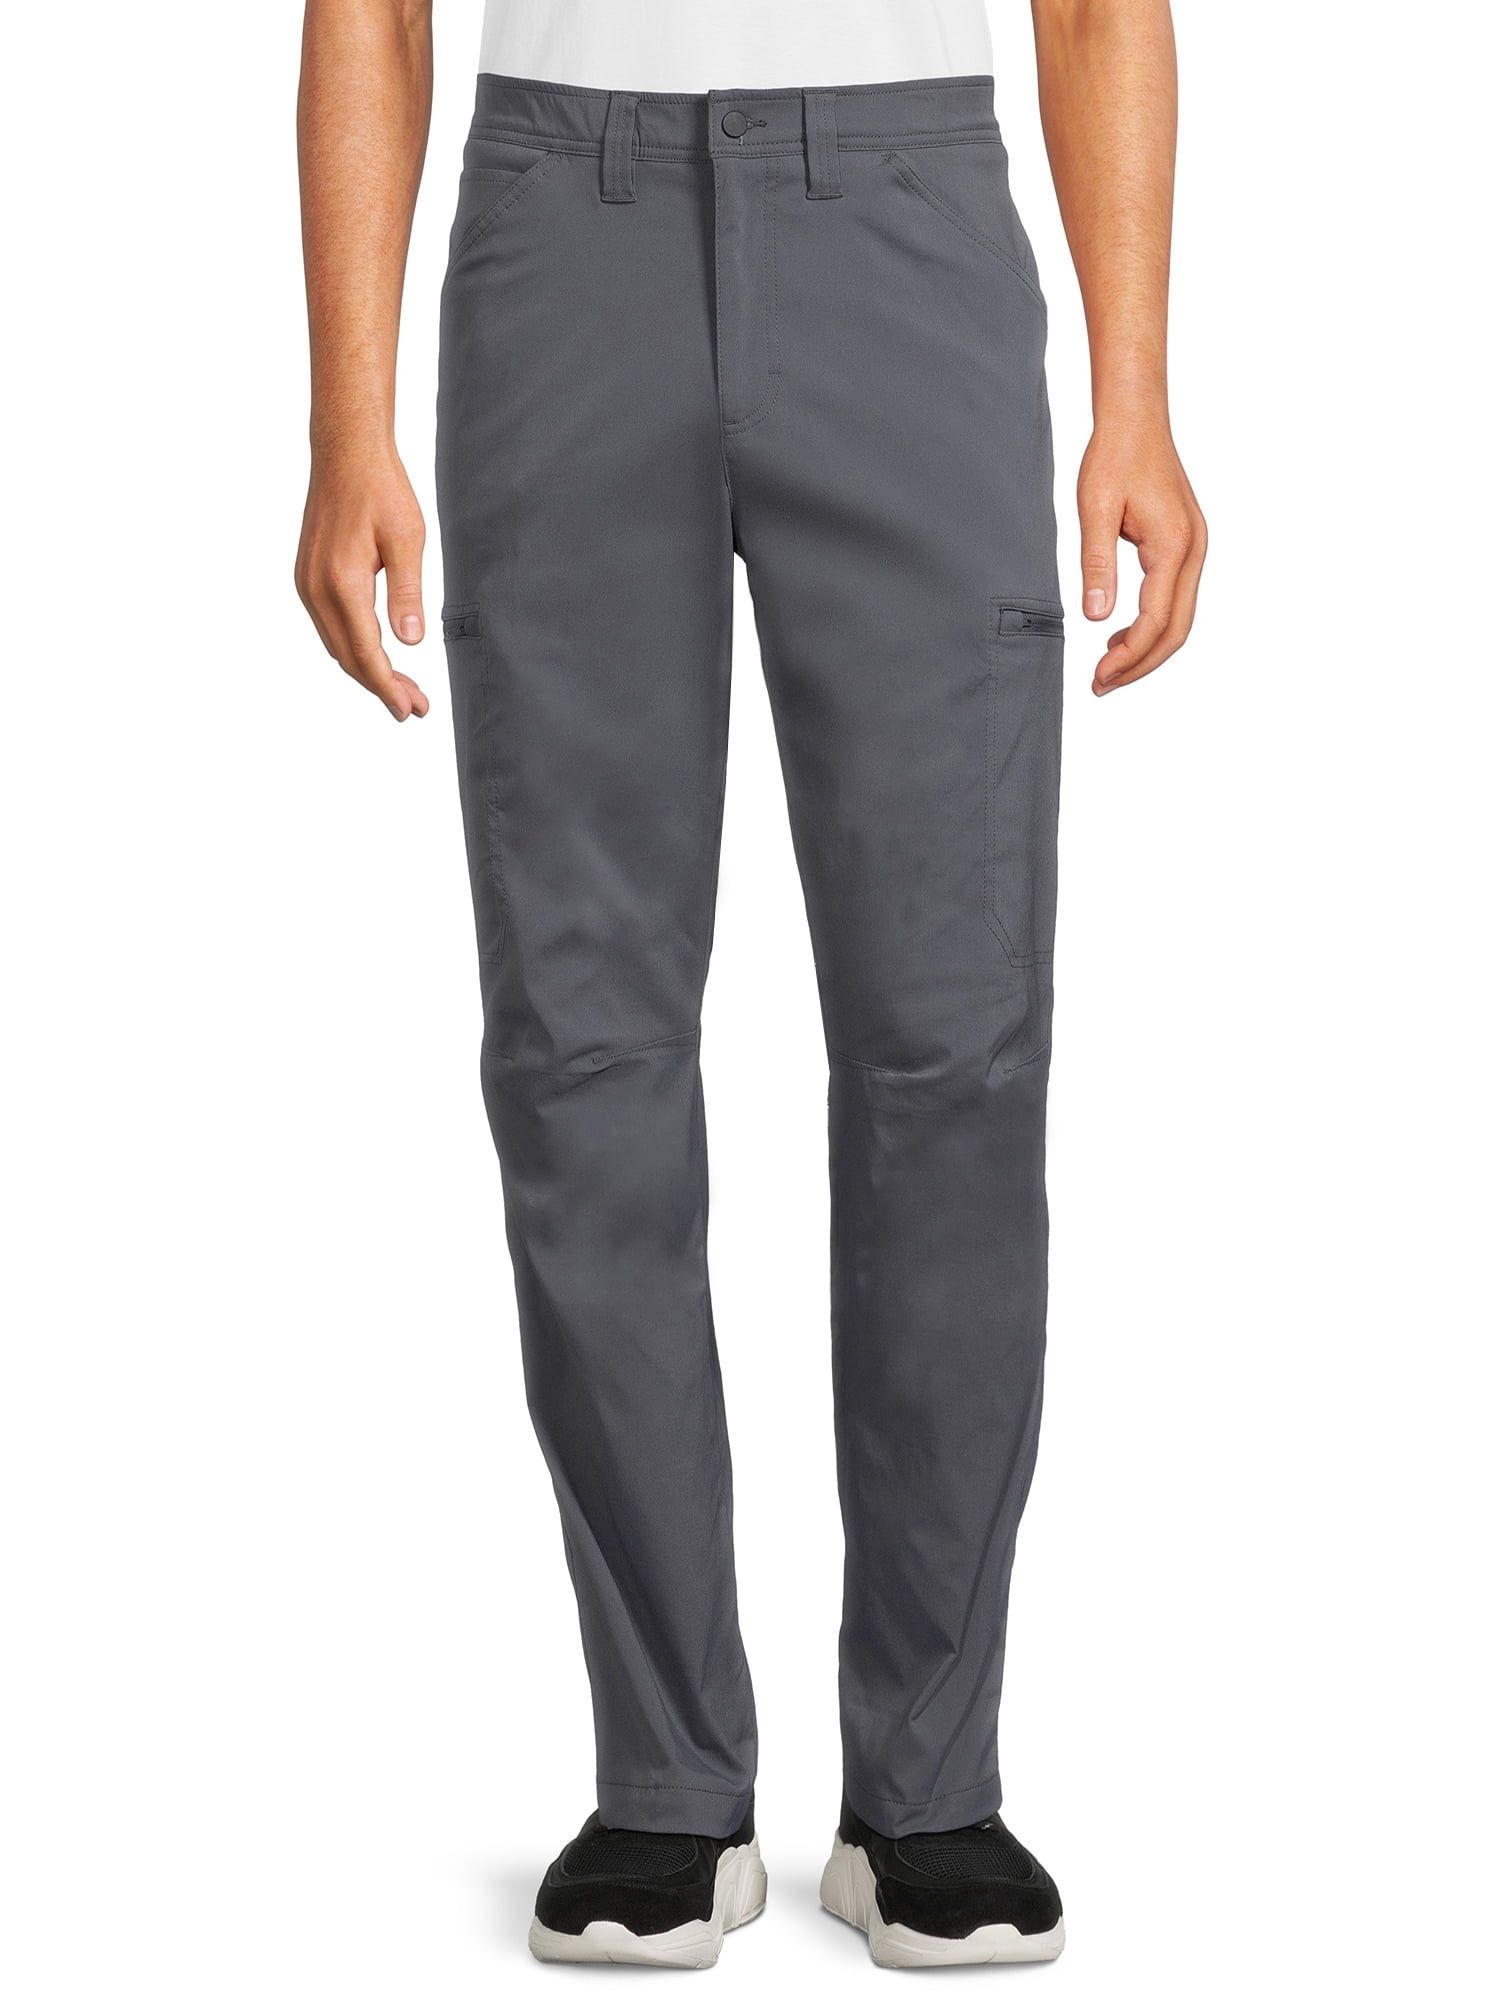 George Men's Synthetic Lined Pants - Walmart.com